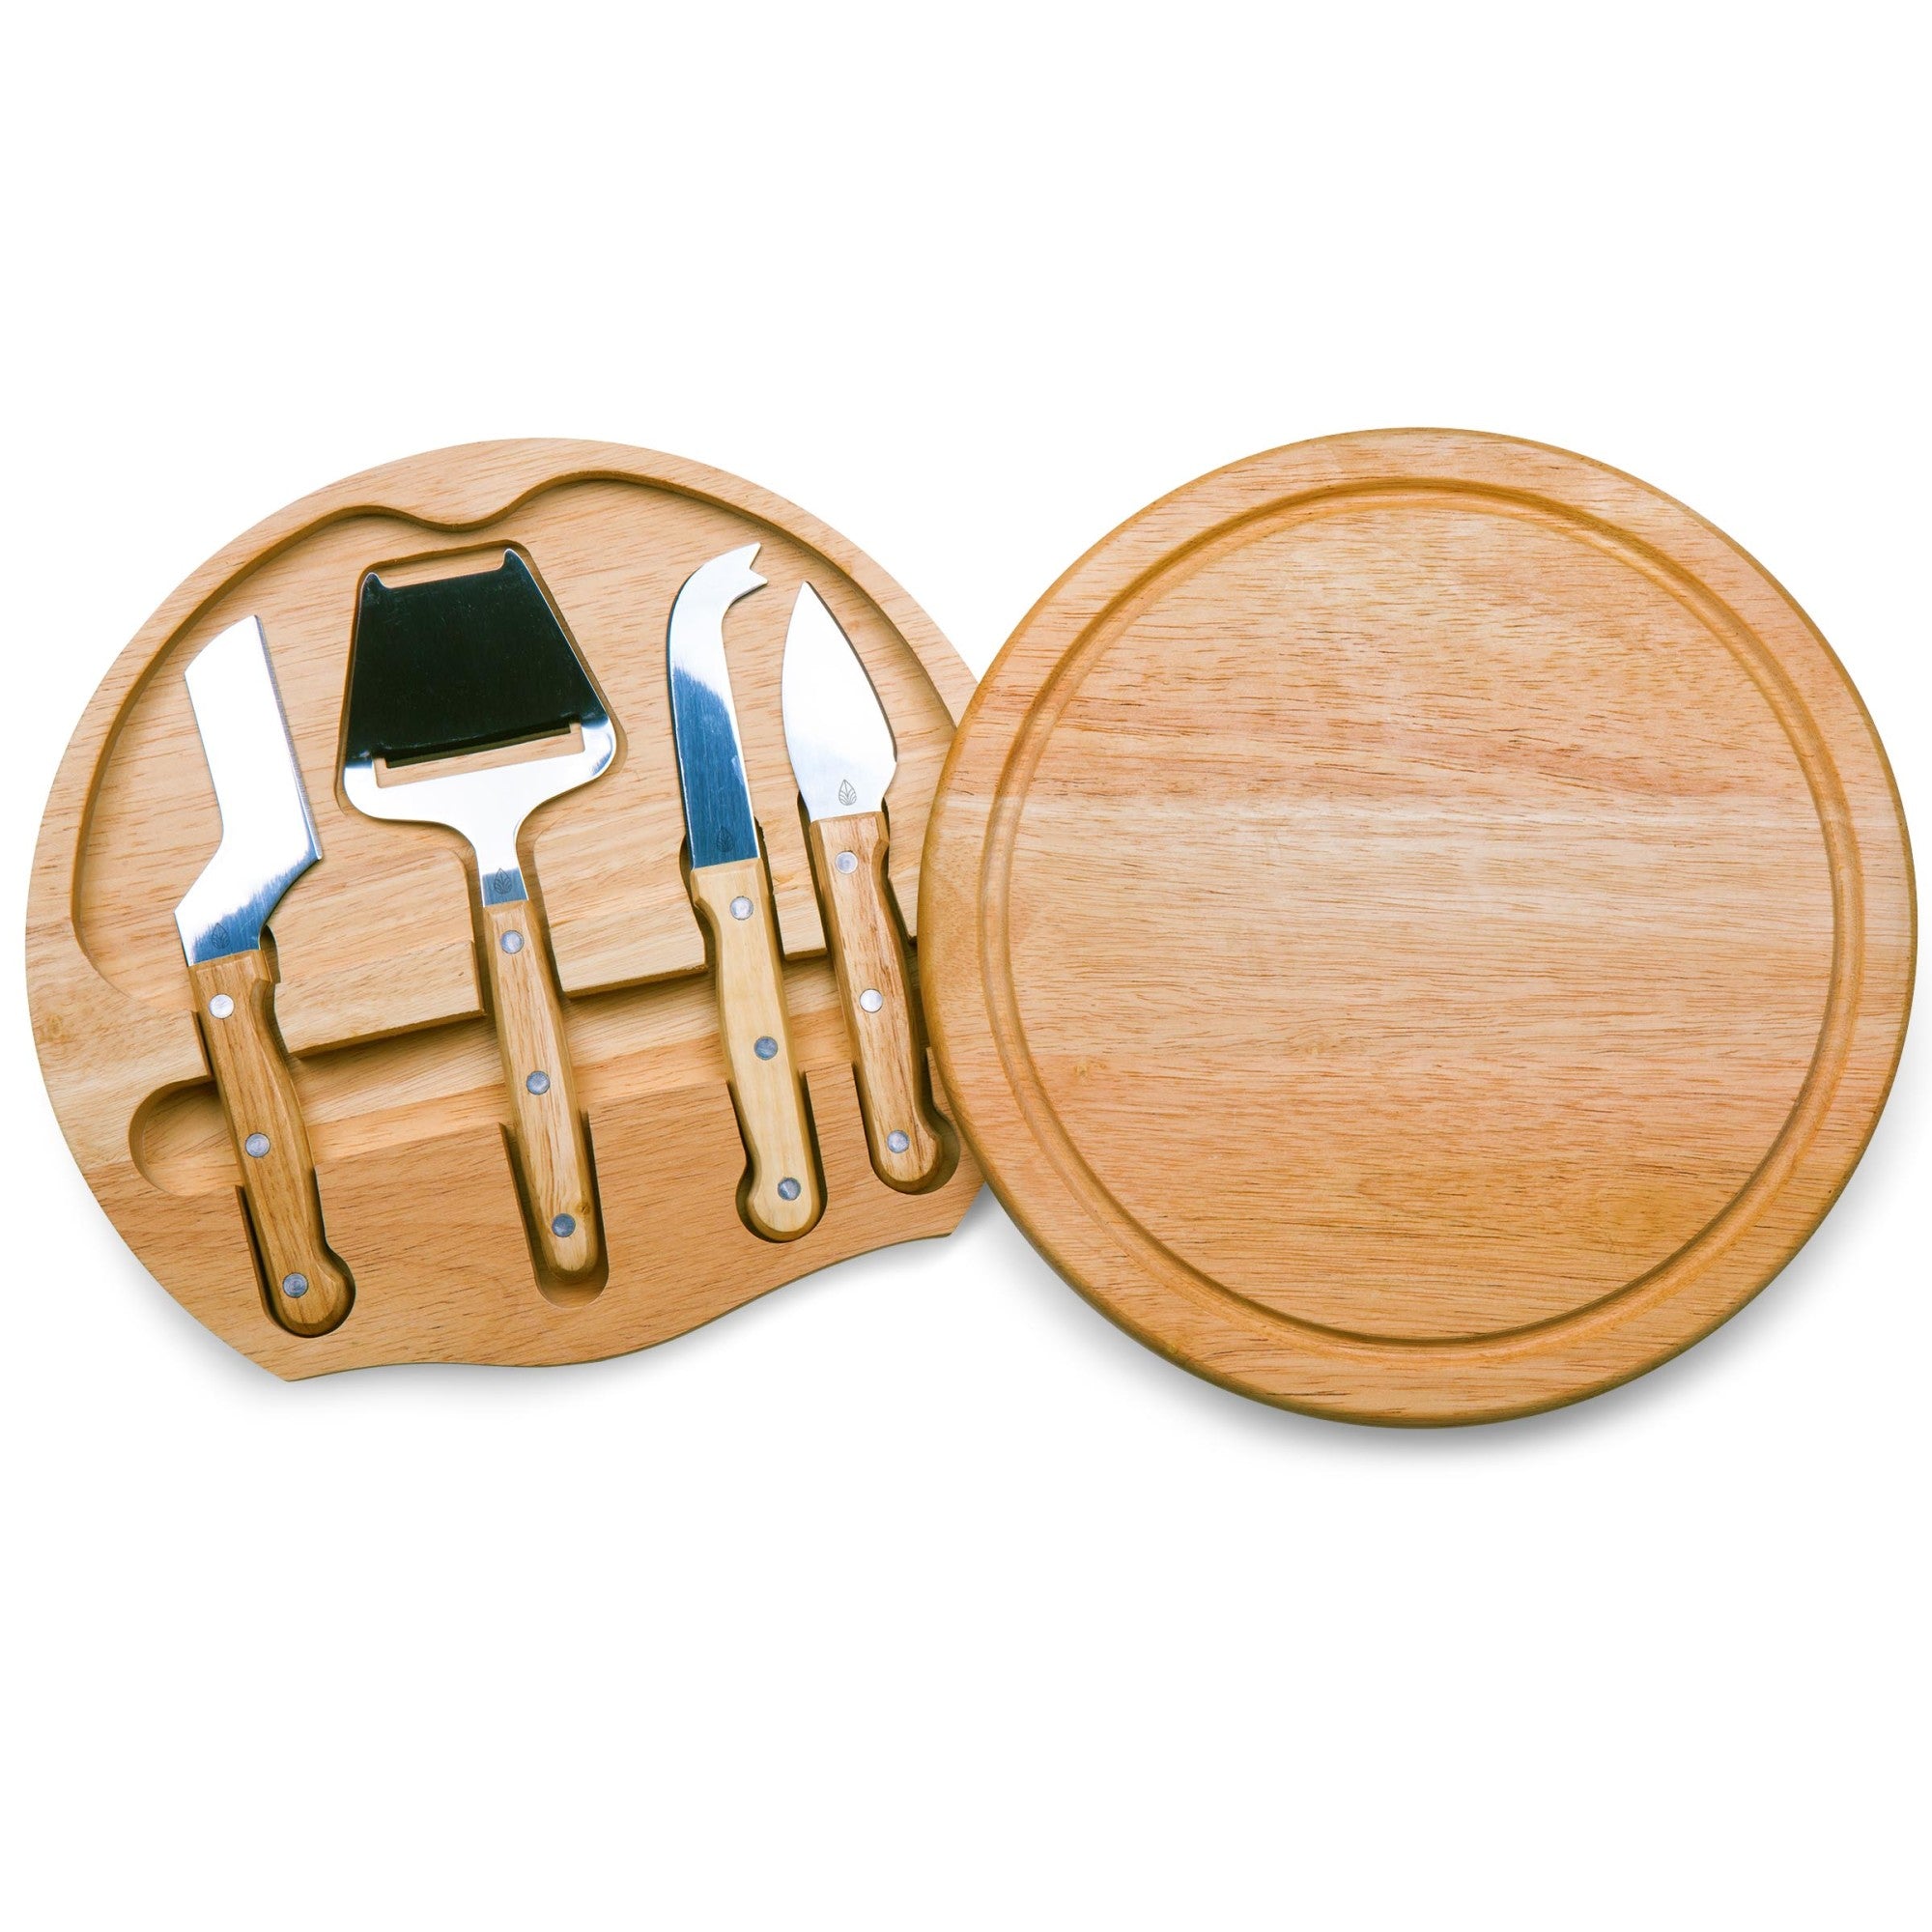 Los Angeles Dodgers - Circo Cheese Cutting Board & Tools Set